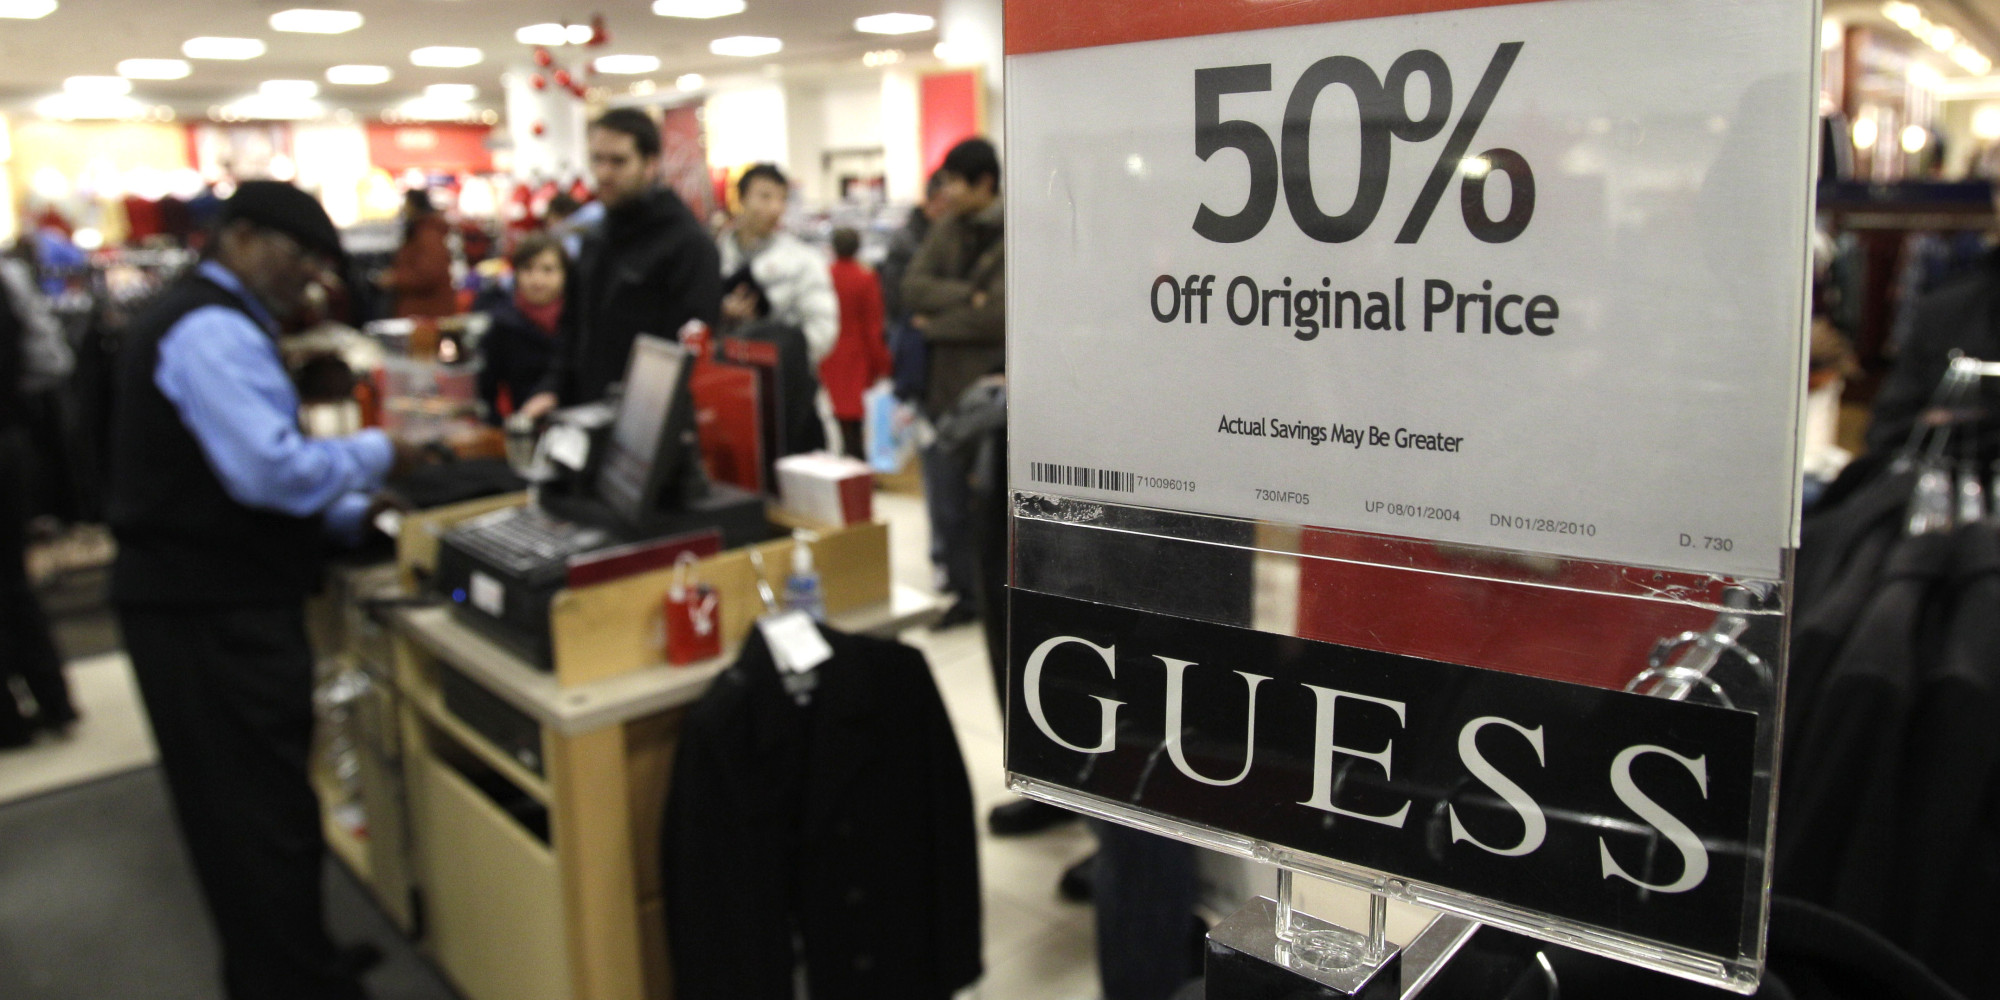 Black Friday 2014 Deals And Discounts | HuffPost UK - What Shops Will Be Doing Black Friday Uk